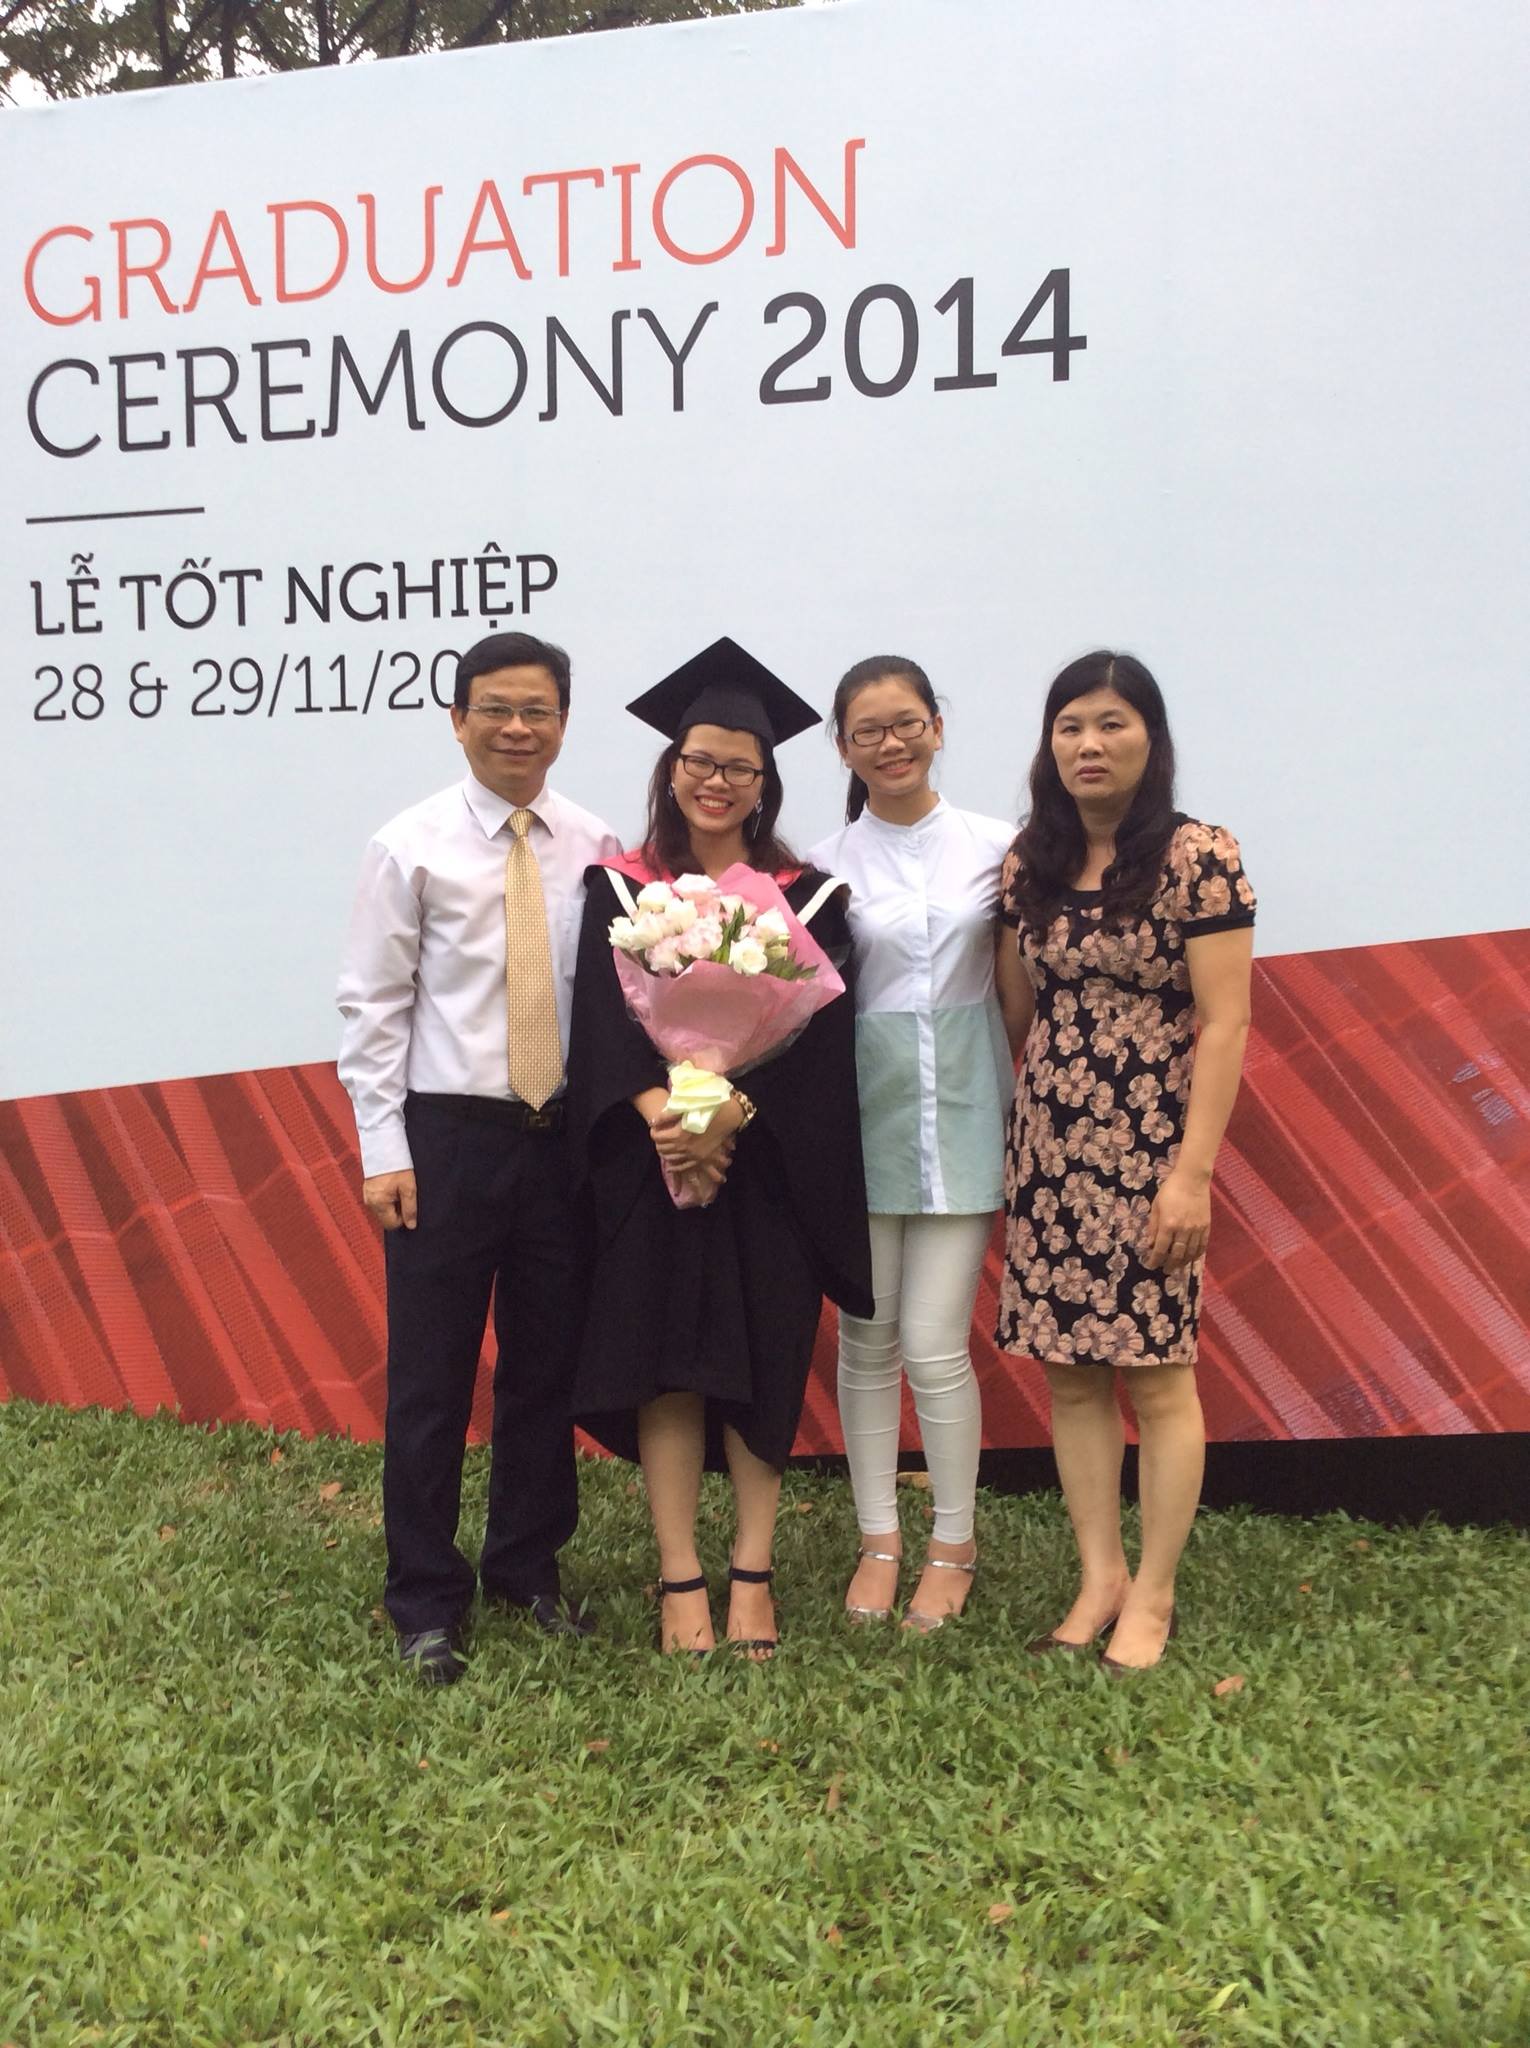 Thu Ha and her family at RMIT Vietnam 2014 graduation ceremony.